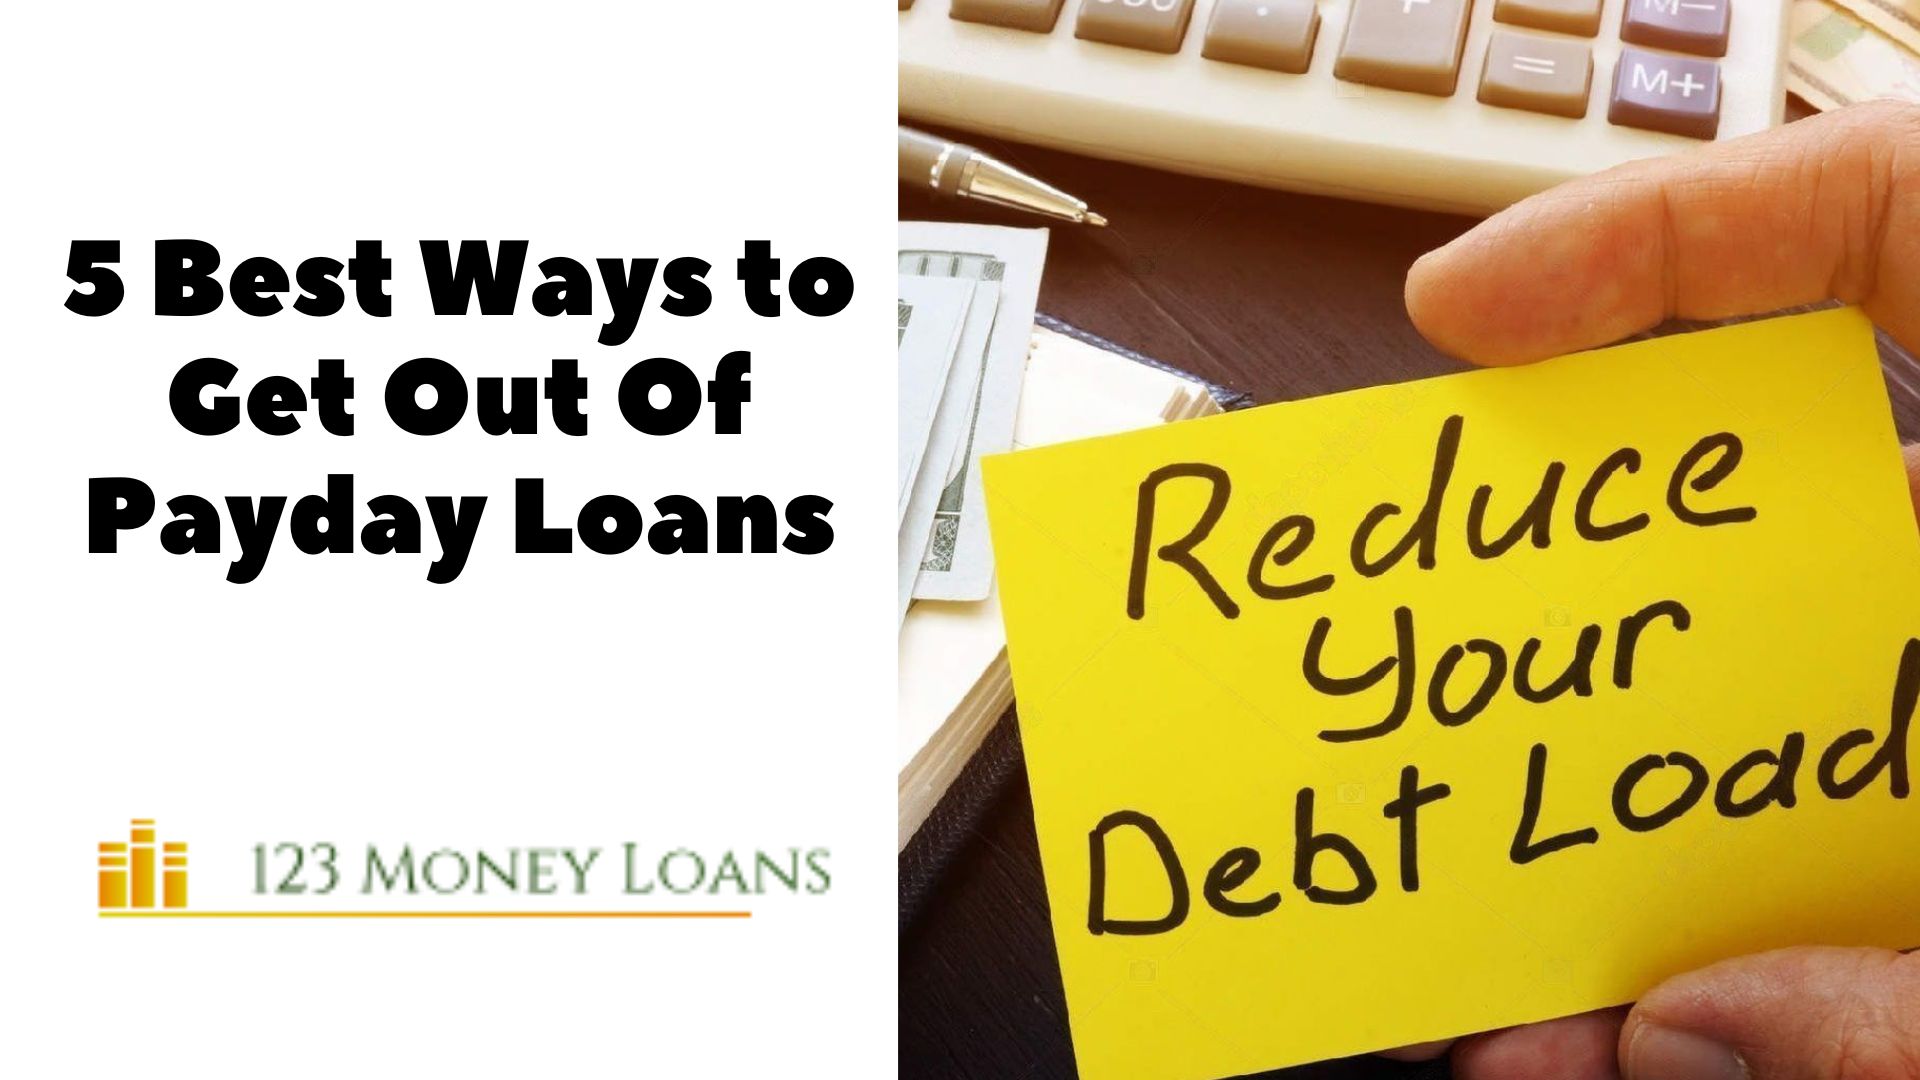 5 Best Ways to Get Out Of Payday Loans